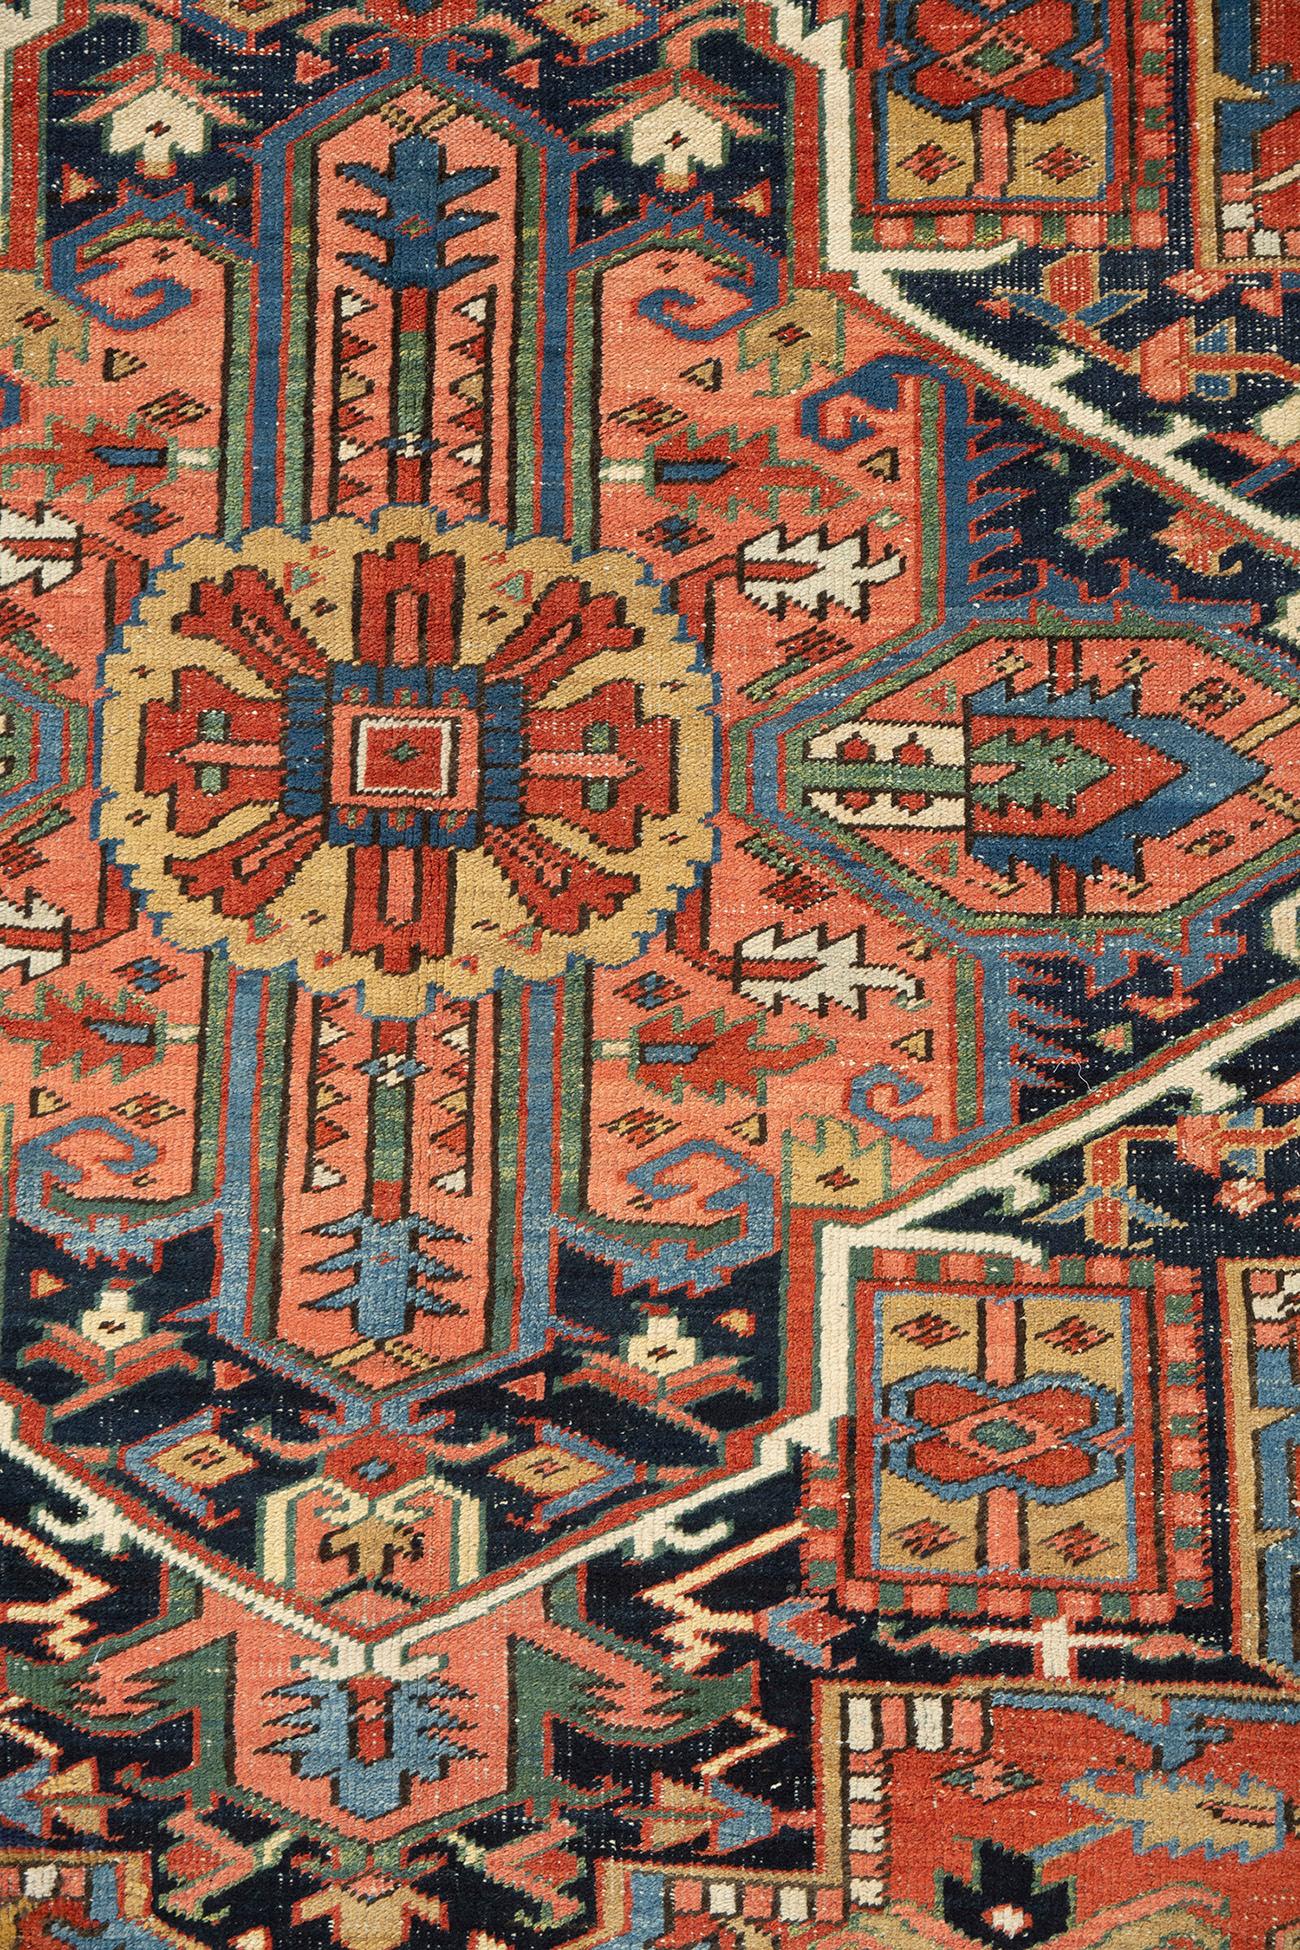 Antique Serapi Rug 10'9 X 19'1. As perpetually fashionable as they are collectible, traditional Heriz luxury handmade rugs are skillfully woven in vibrant colors and emphatic geometric designs. The Heriz district of NW Persia has been weaving